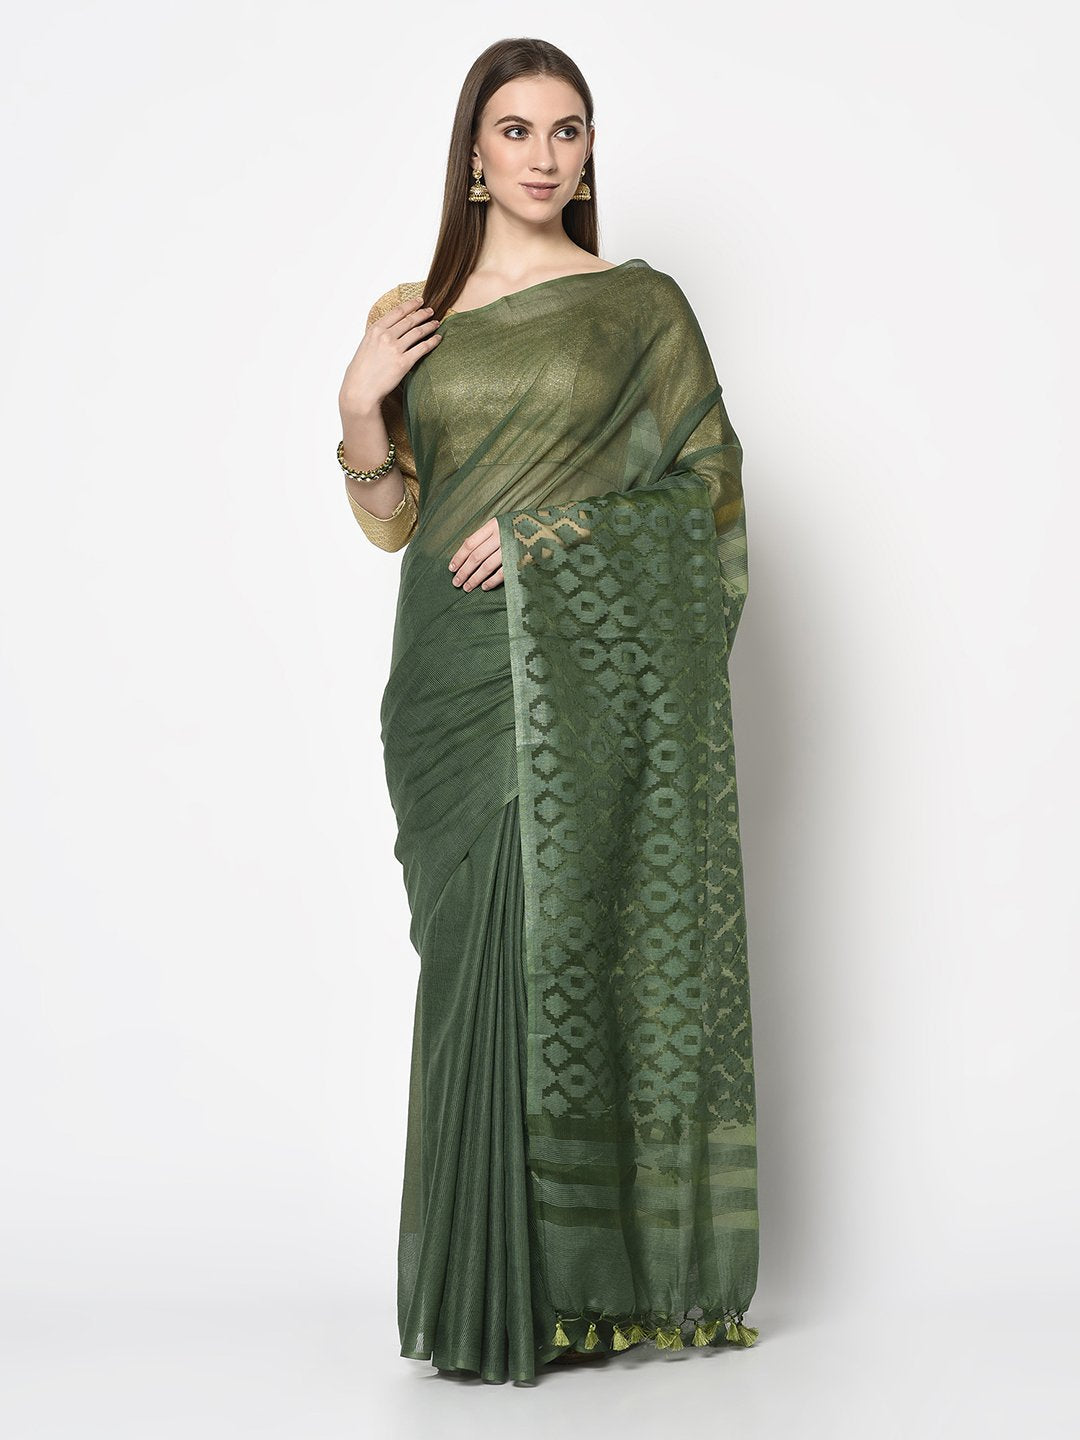 Shop Fancy Saree In Bottle Green Colour which is Saree online at simaaya At